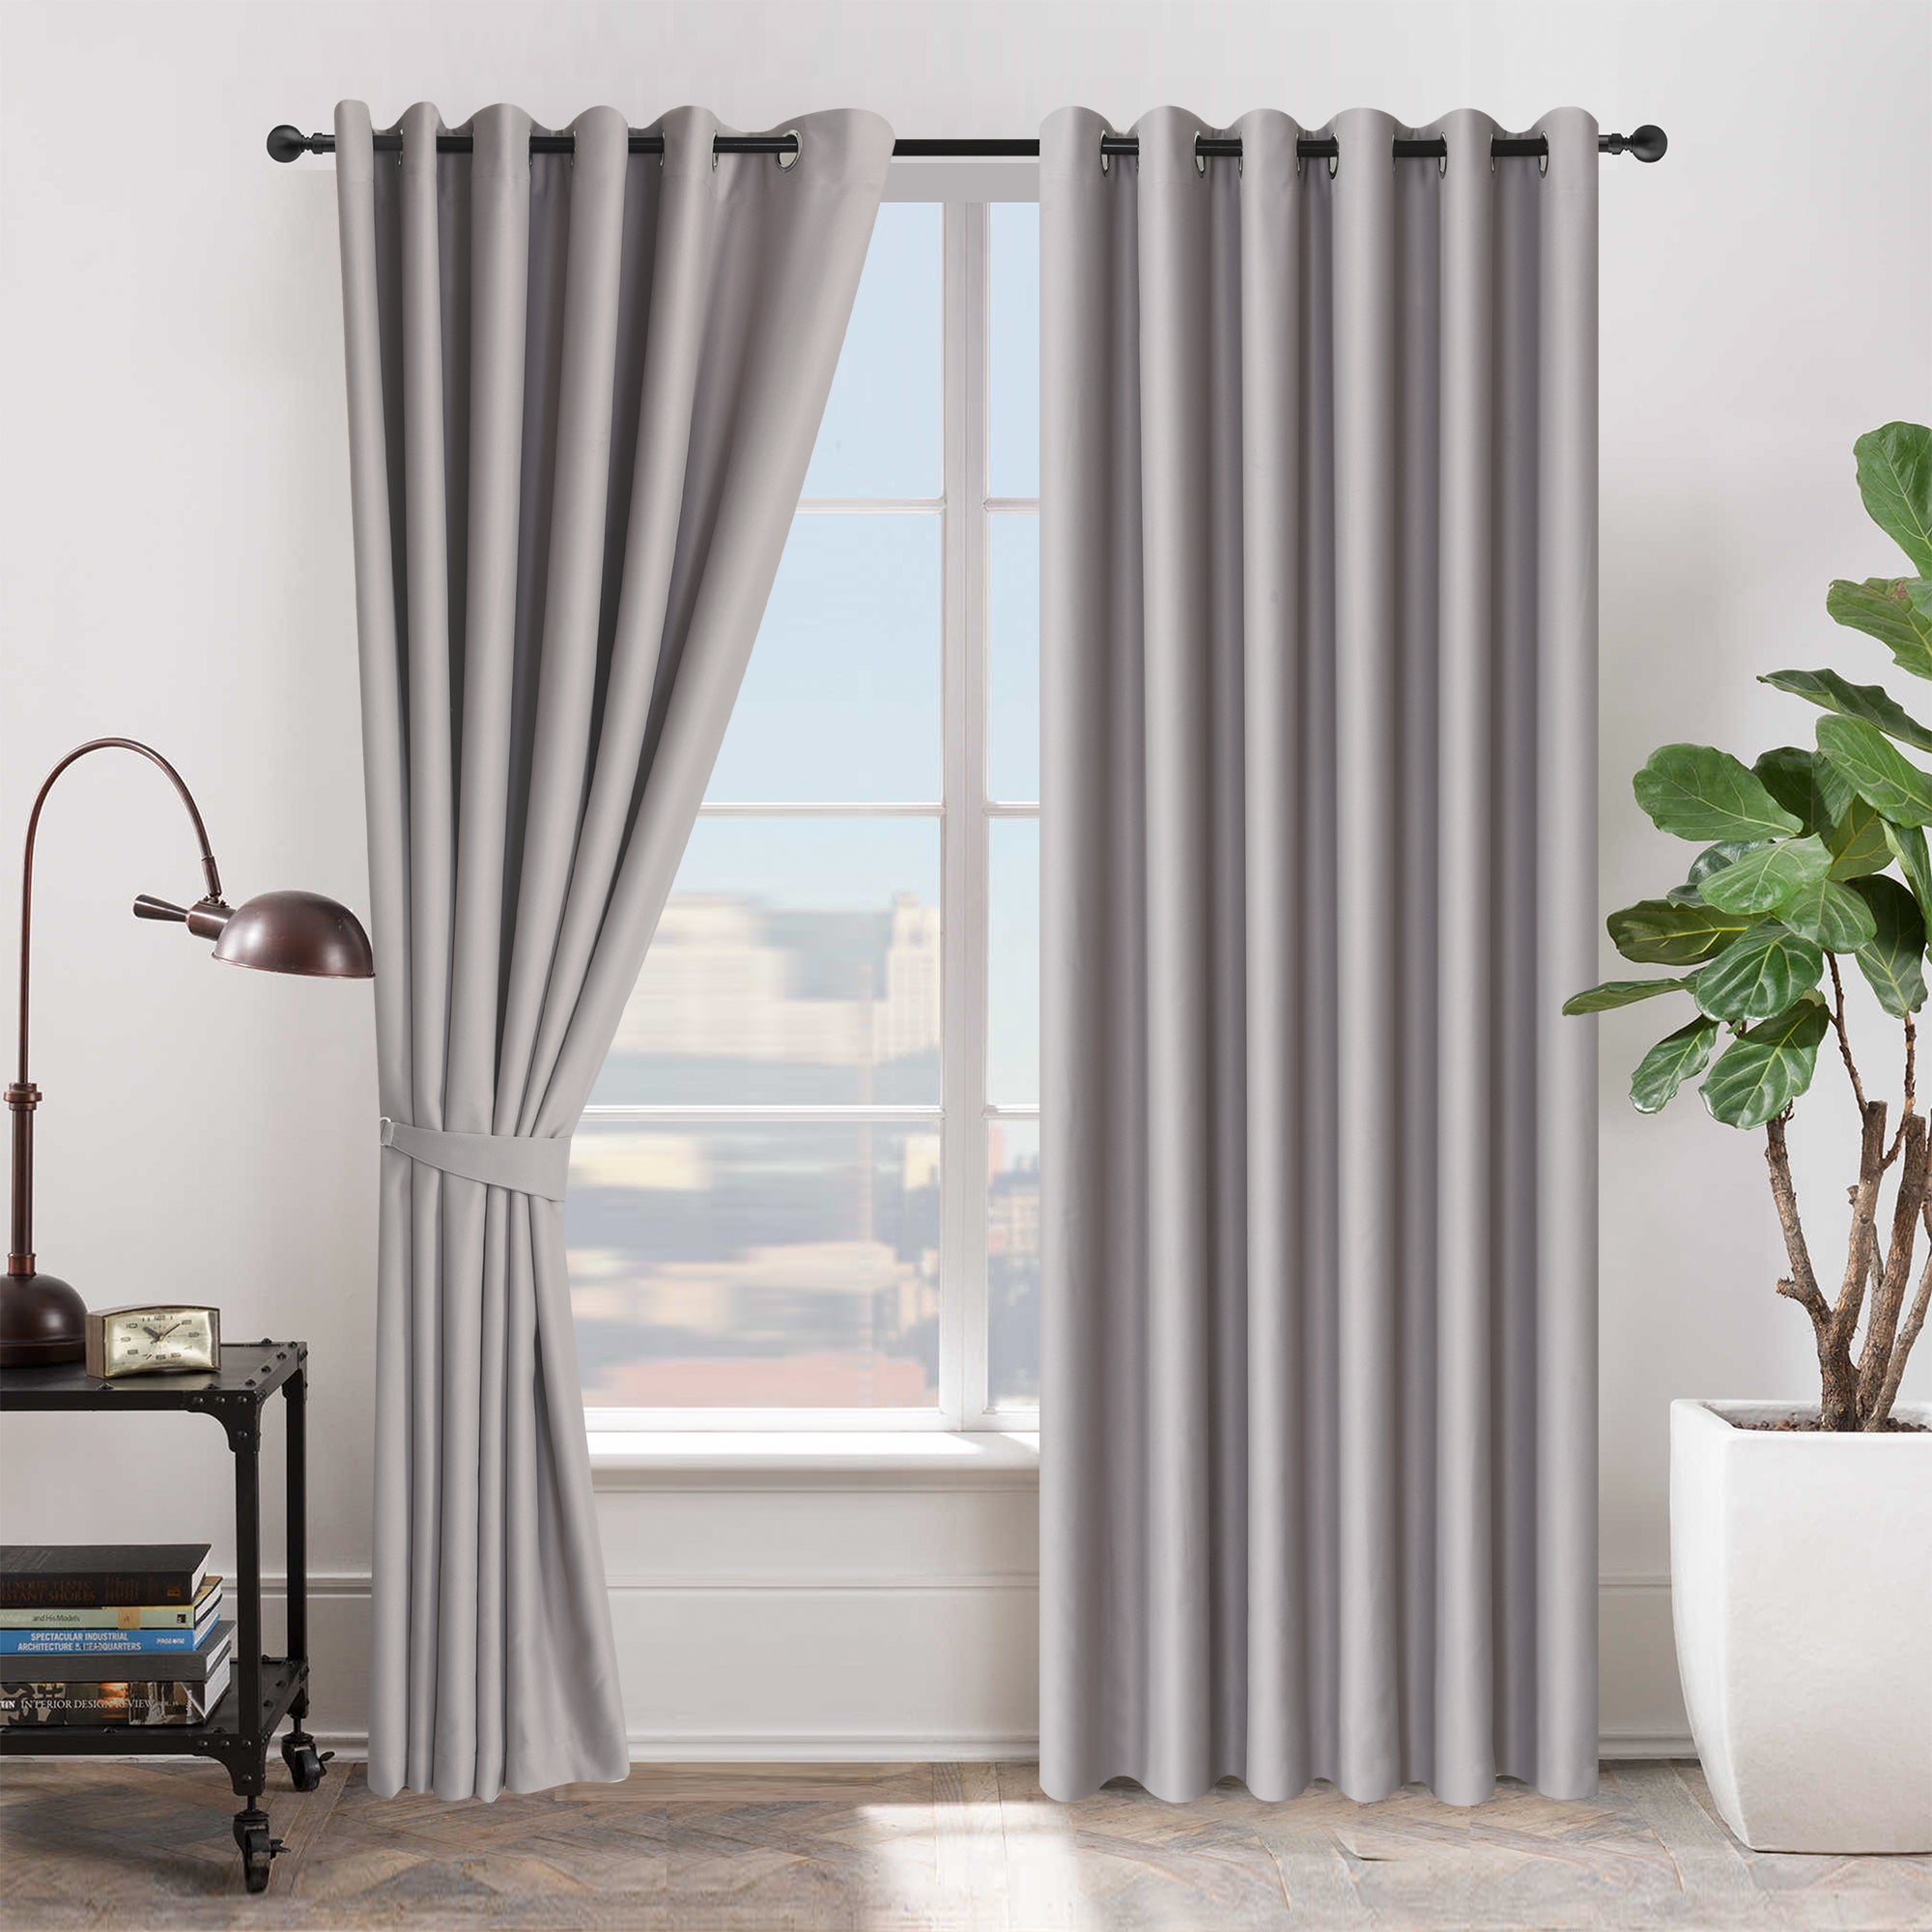 THERMAL BLACKOUT WINDOW CURTAINS EYELET RING TOP WITH TIE BACKS